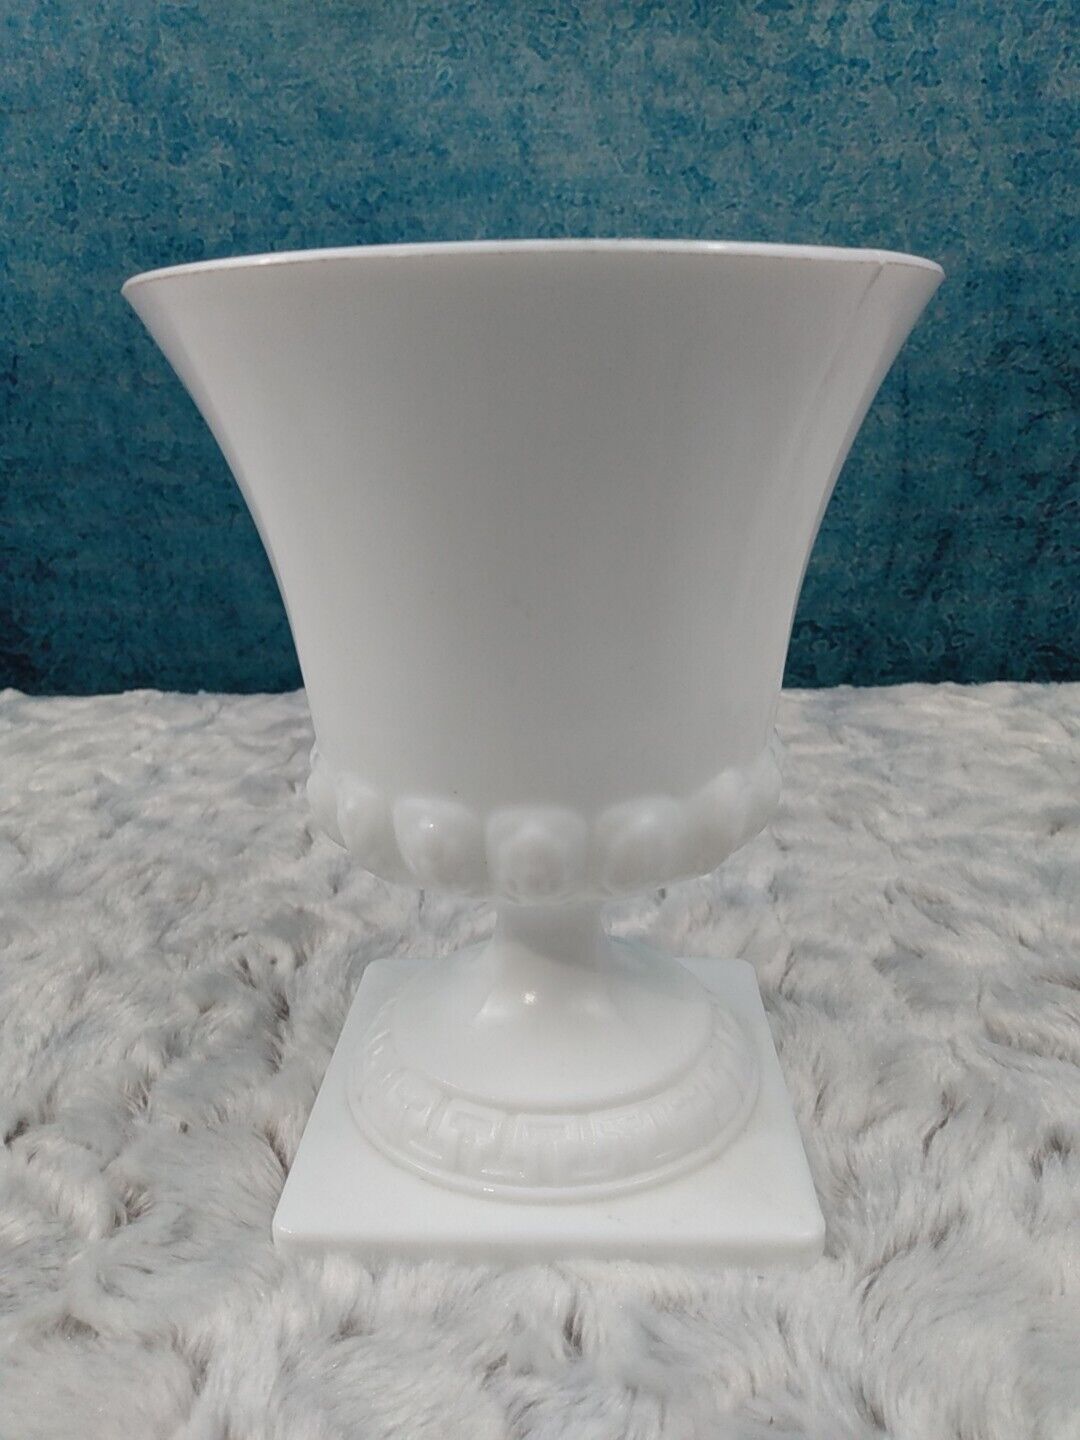 E.O. Brody Co. Vintage White Milk Glass 7” Tall Footed Vase/Planter/ Grecian Urn